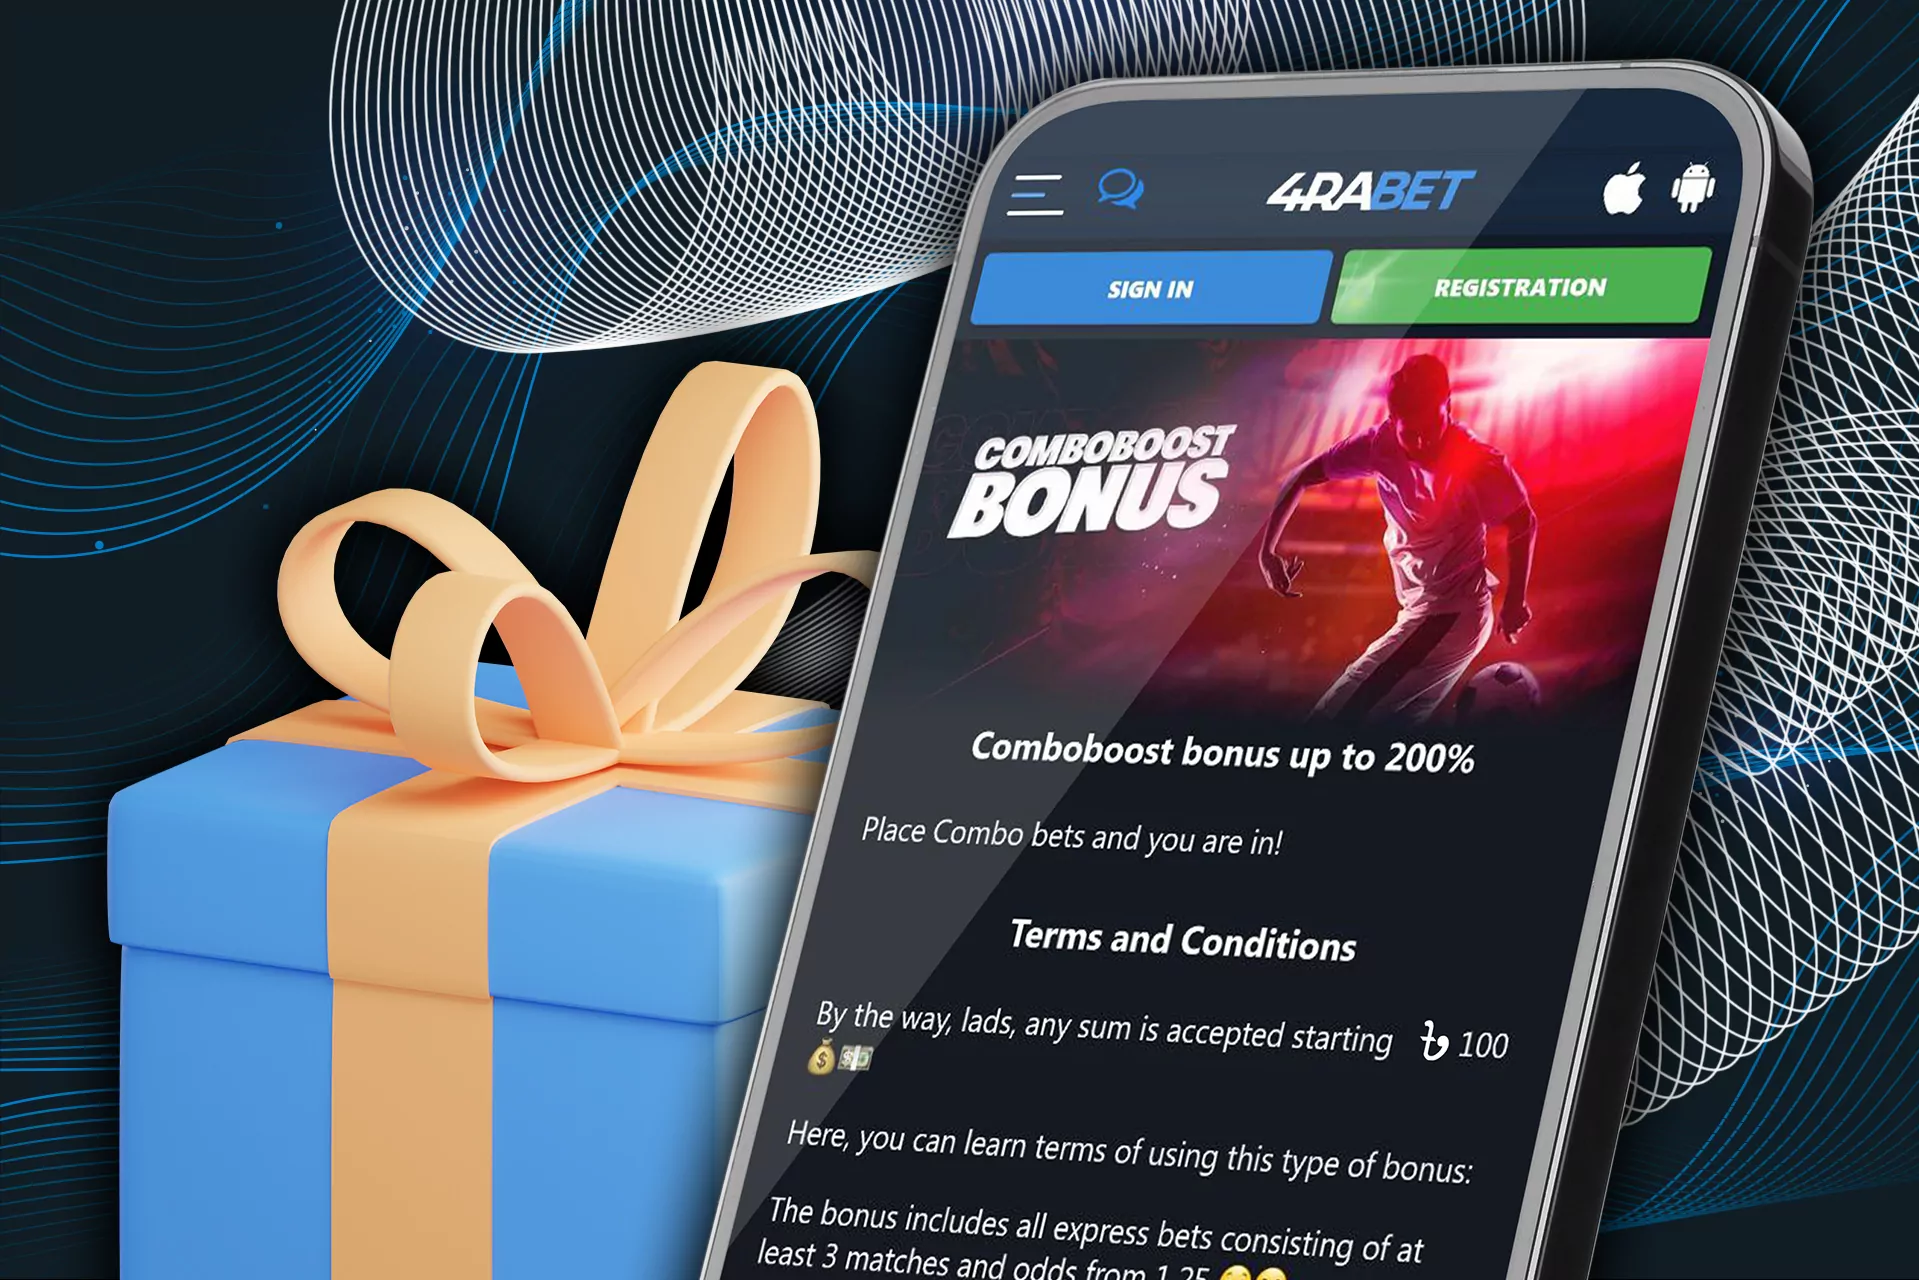 The bonus applies to all betting events available at the time of use.